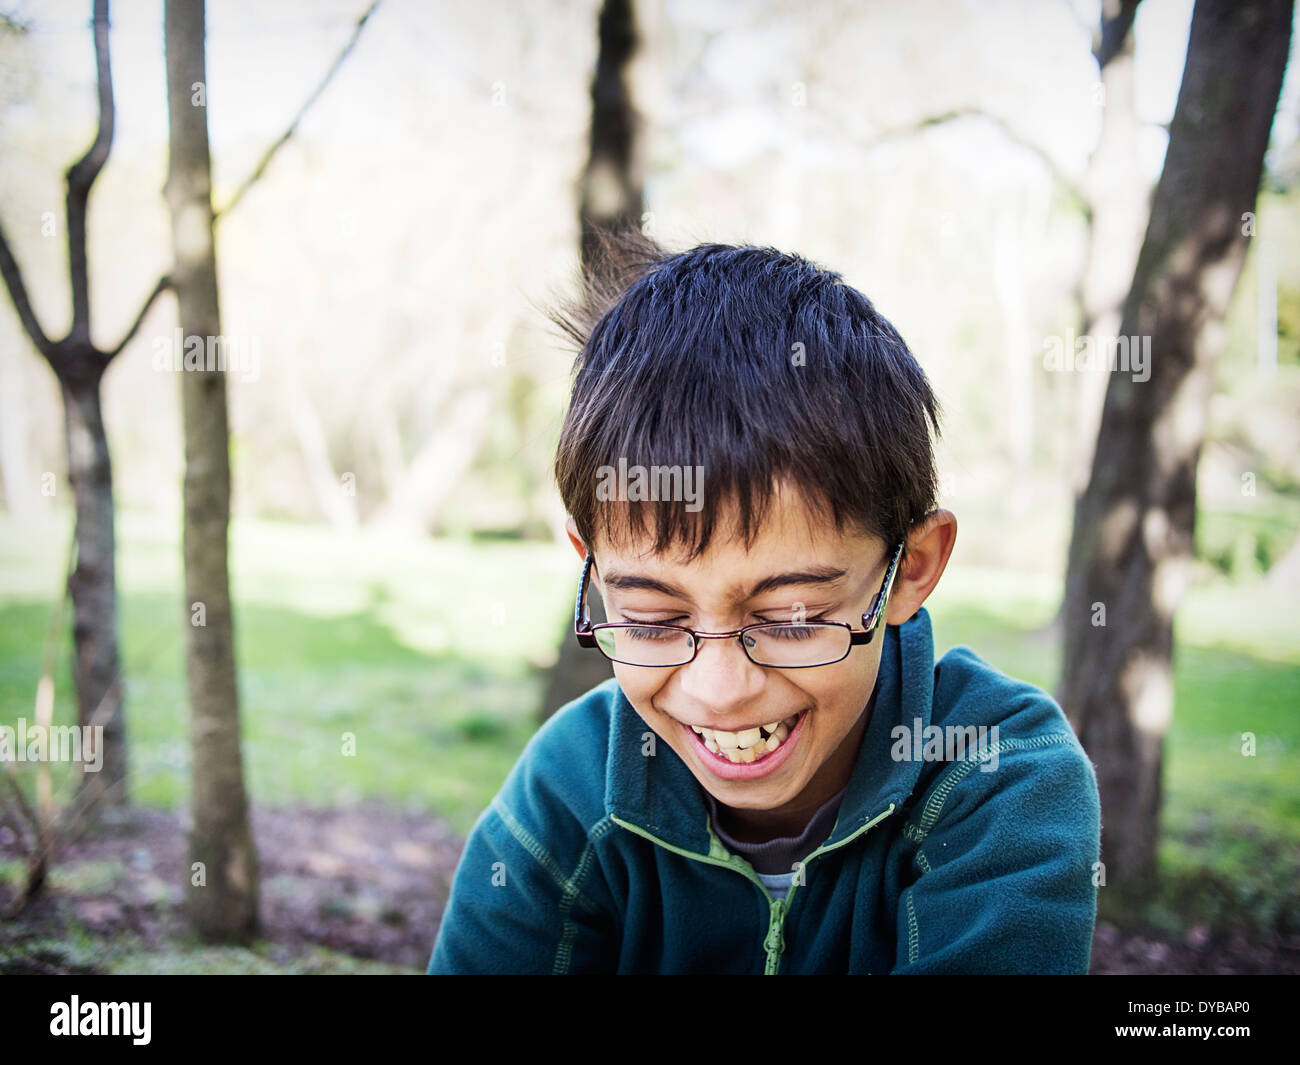 Laughter Stock Photo